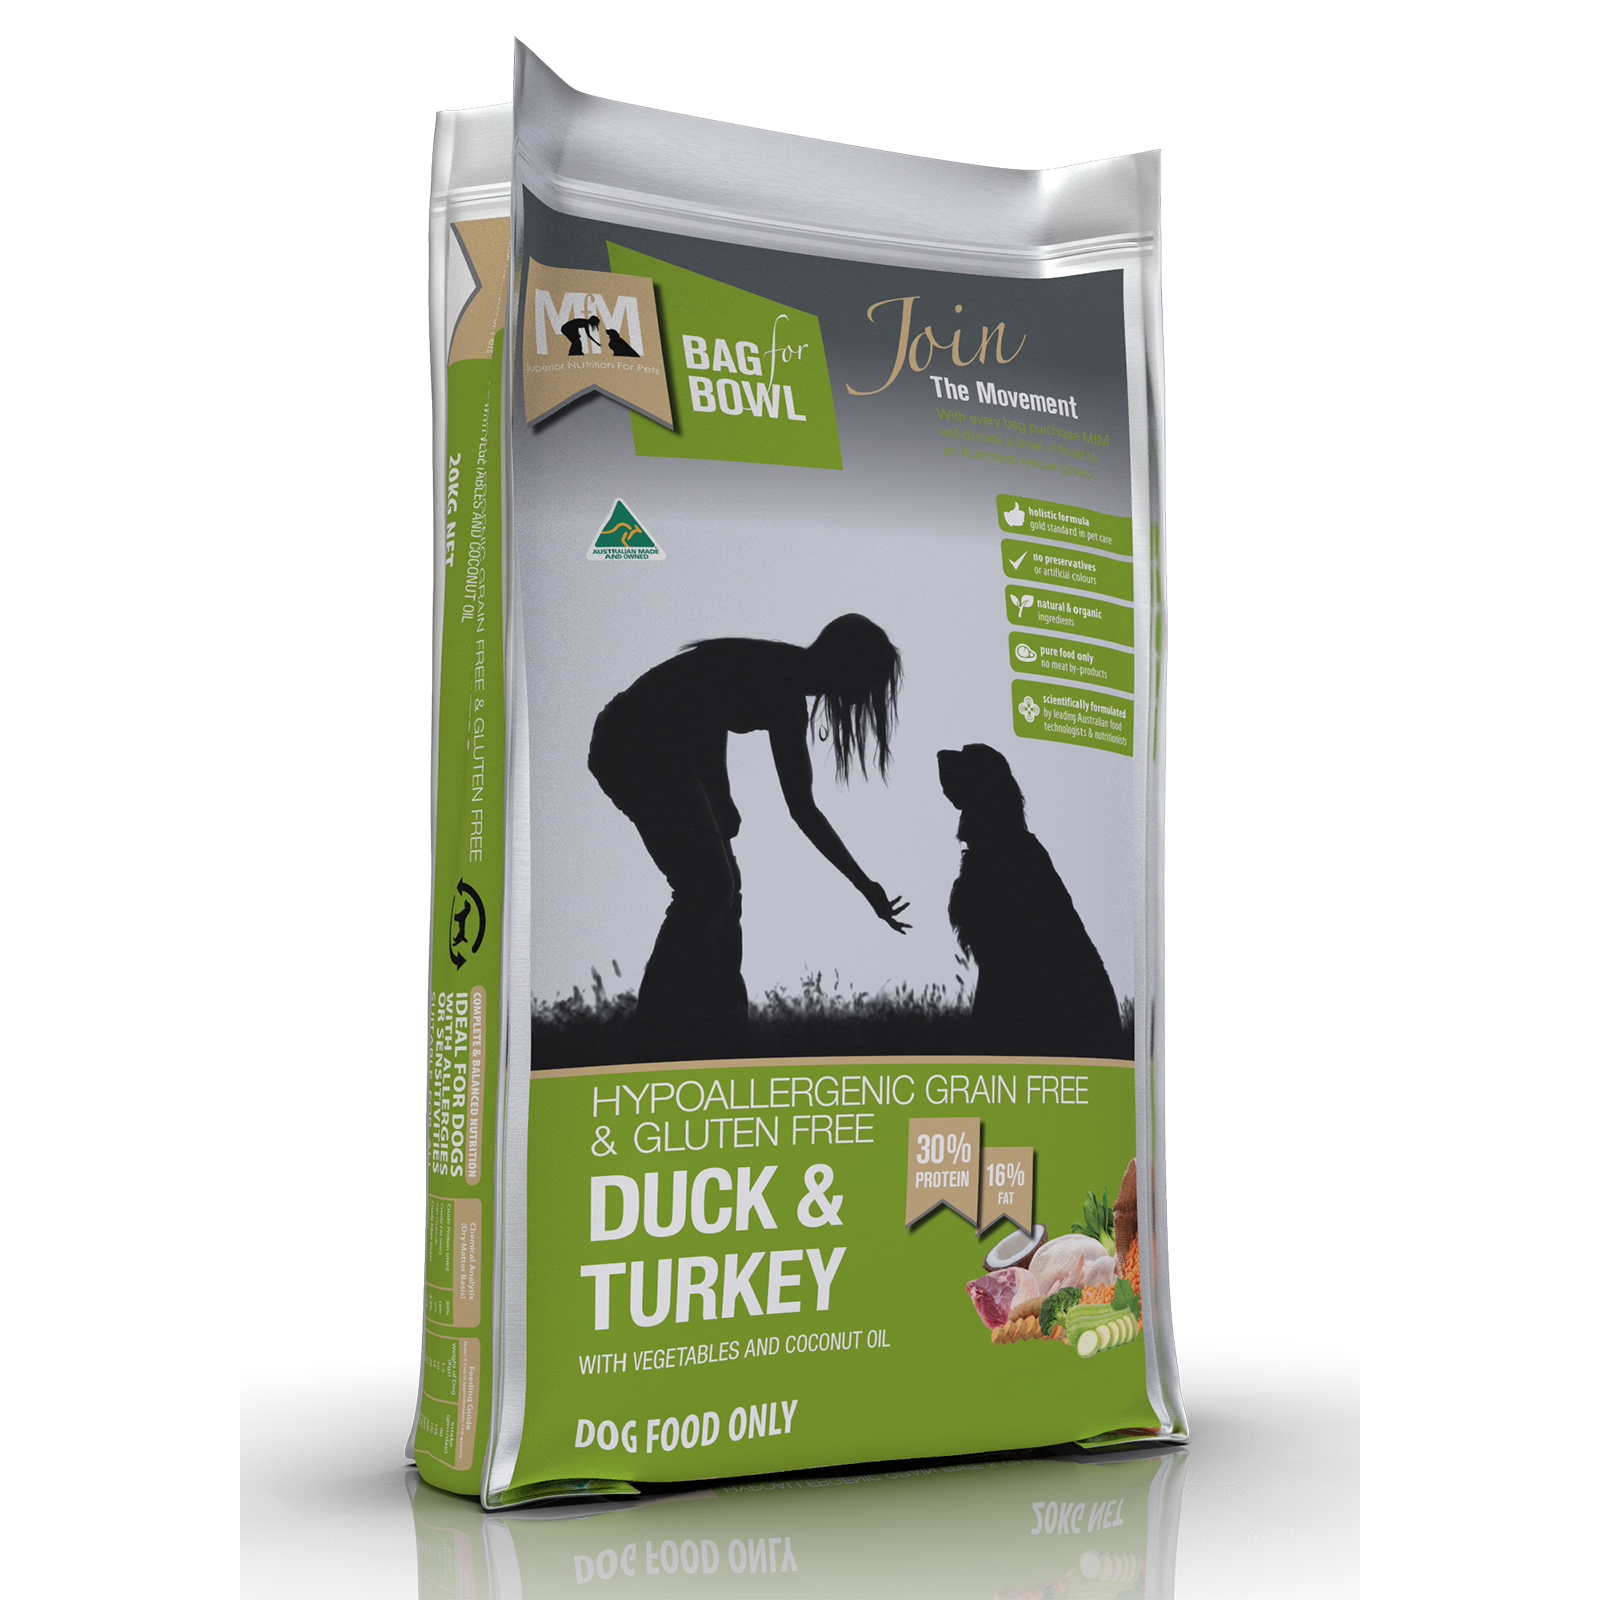 Meals for Mutts Grain Free Dog Food Adult Duck & Turkey